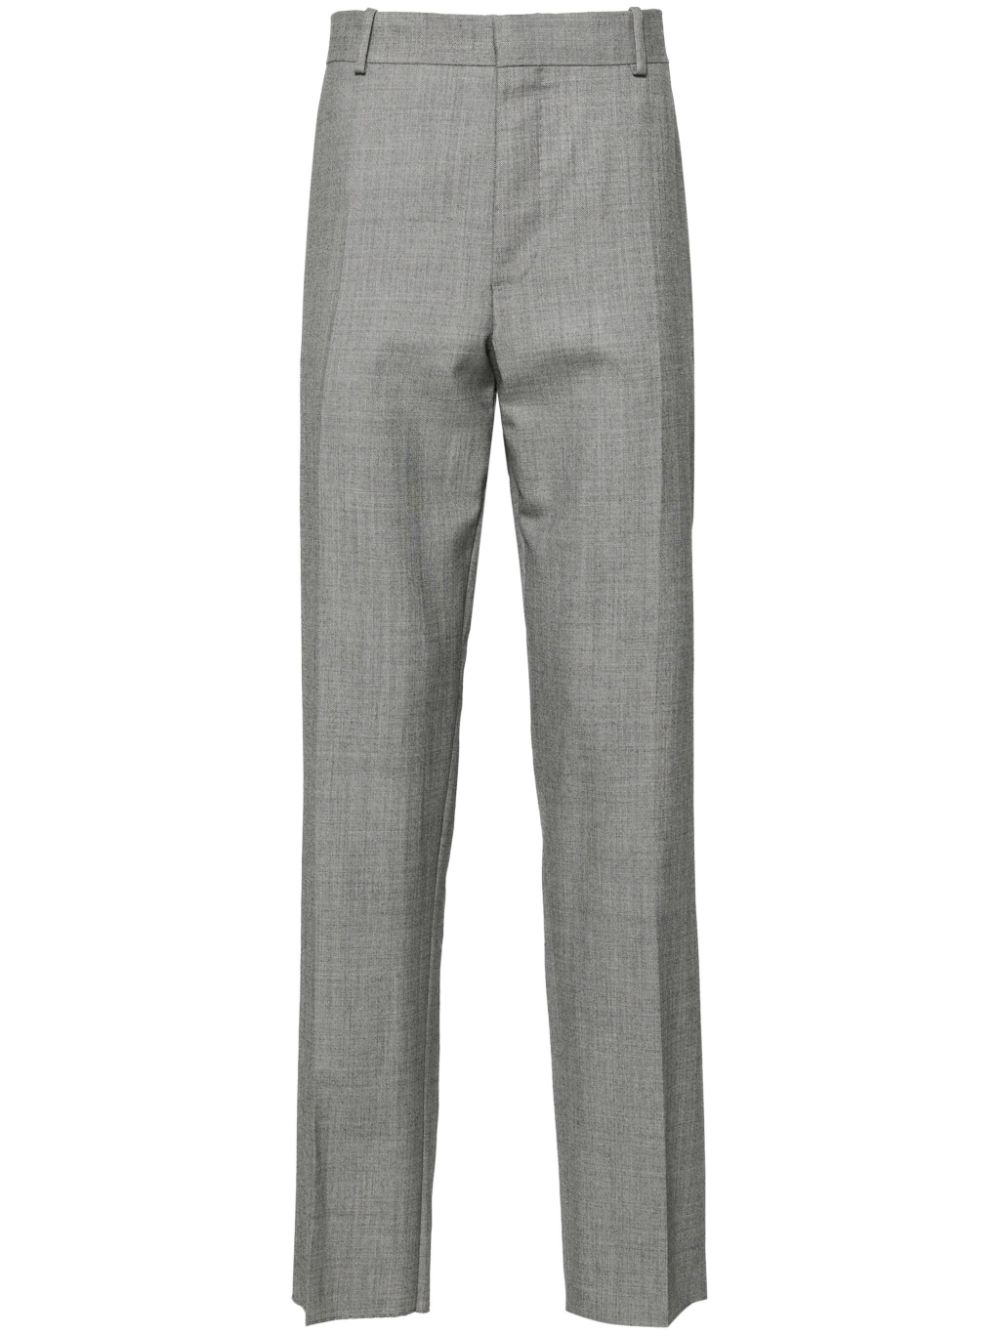 Image 1 of Alexander McQueen mid-rise wool tailored trousers